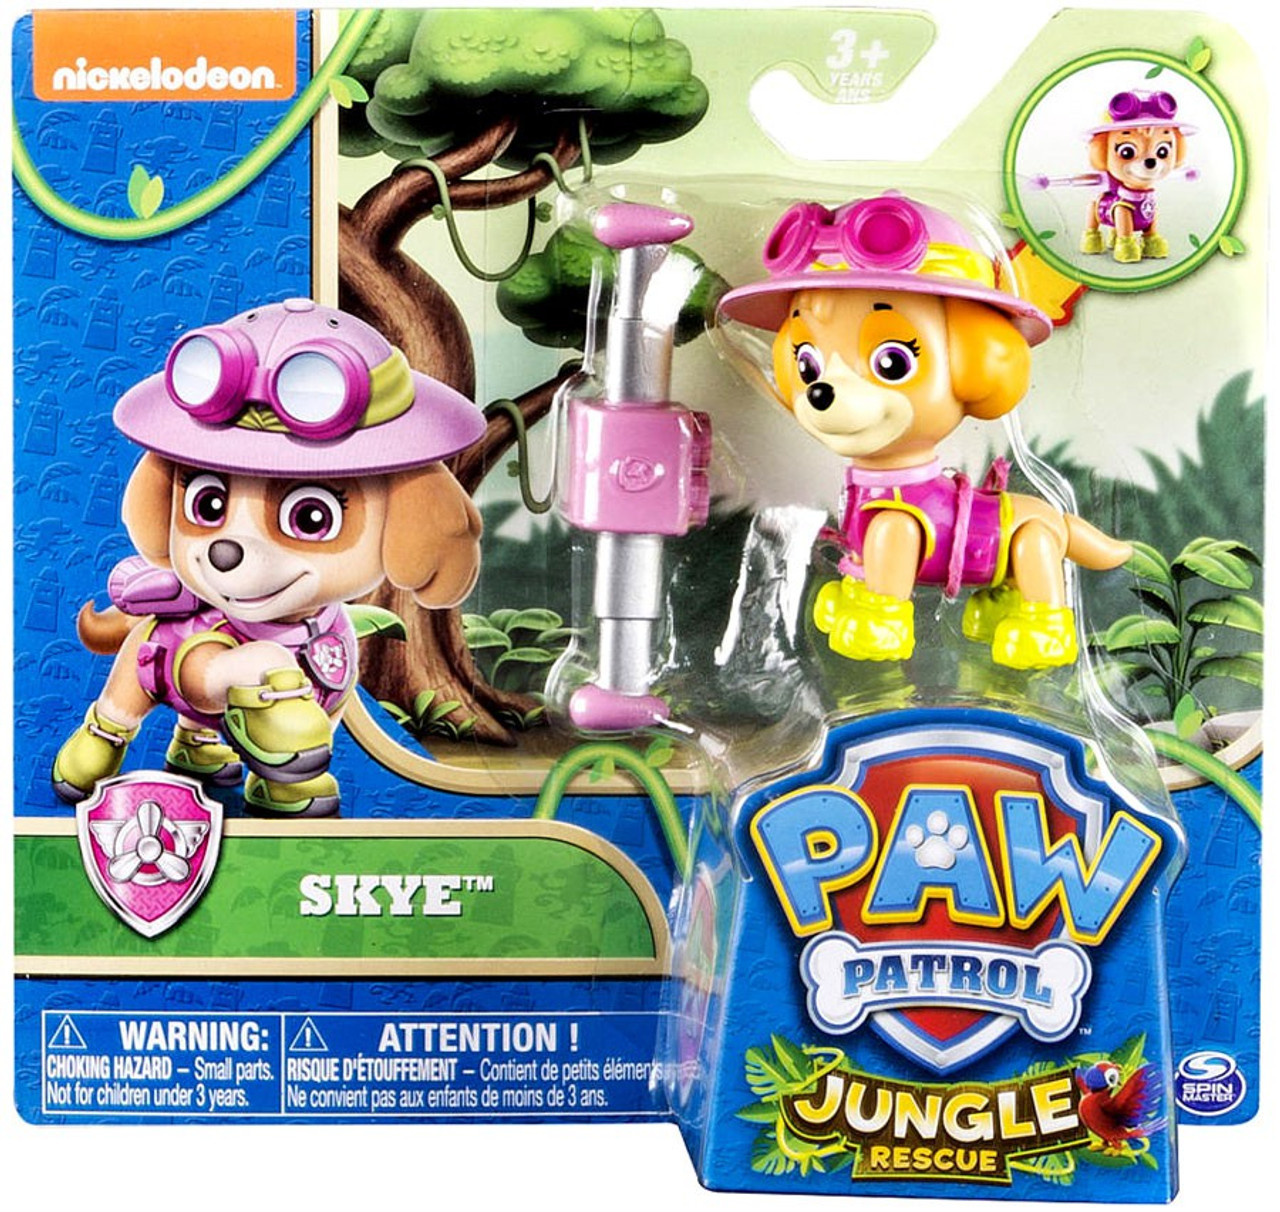 pause rygte Gnaven Paw Patrol Jungle Rescue Skye Spin Master - ToyWiz